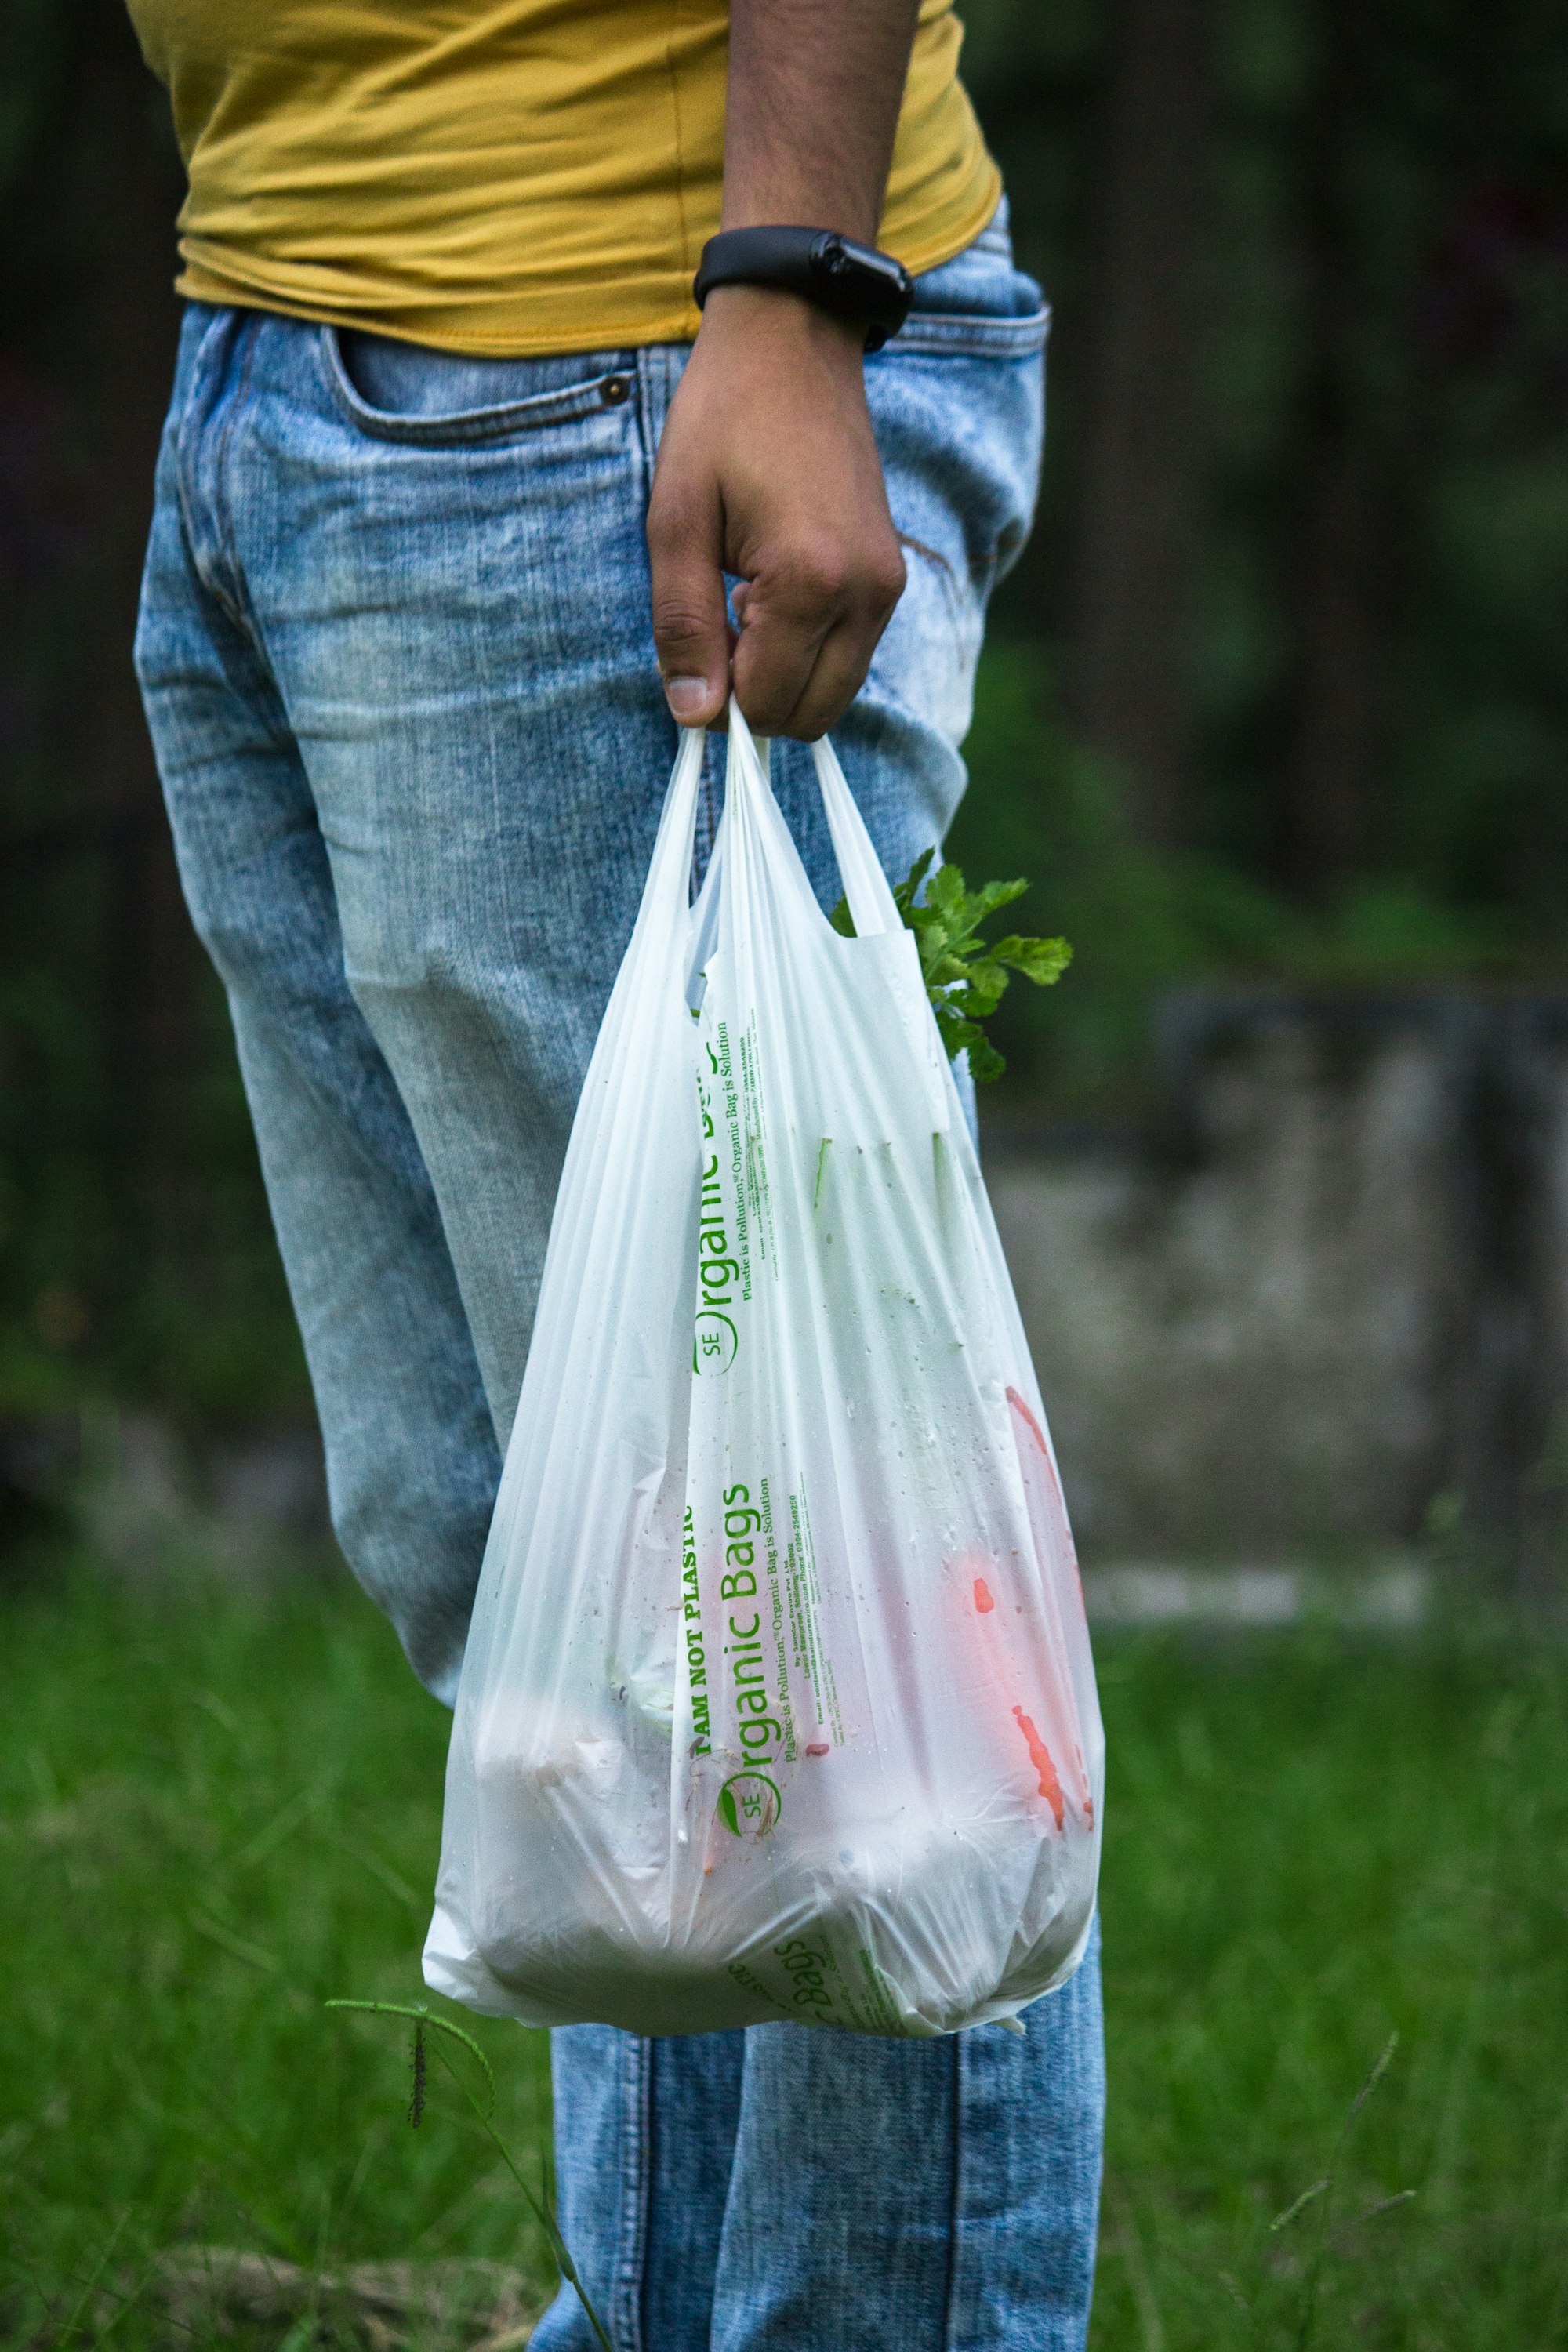 SE Organic Bags is 100% compostable bags made up of PLA based material. The bag will get composted in a maximum of 180 days under composting conditions without harming environment. 
Plastic is POLLUTION, SE Organic Bag is SOLUTION

For more information kindly visit www.saindurenviro.com